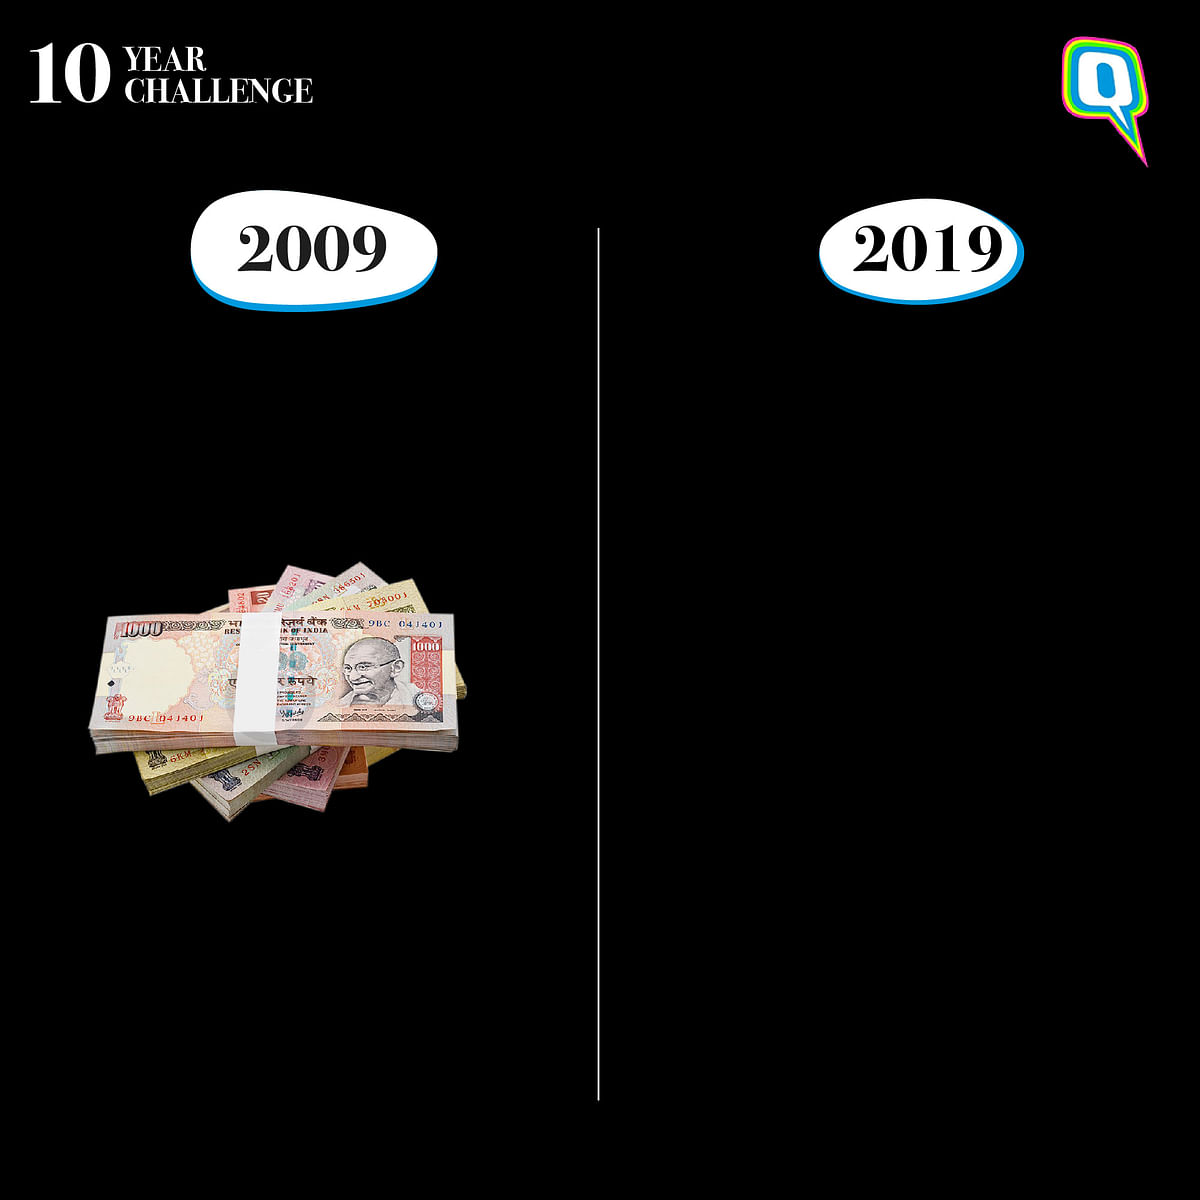 India joins the 10-year-challenge, but remains the same. Well, mostly! 